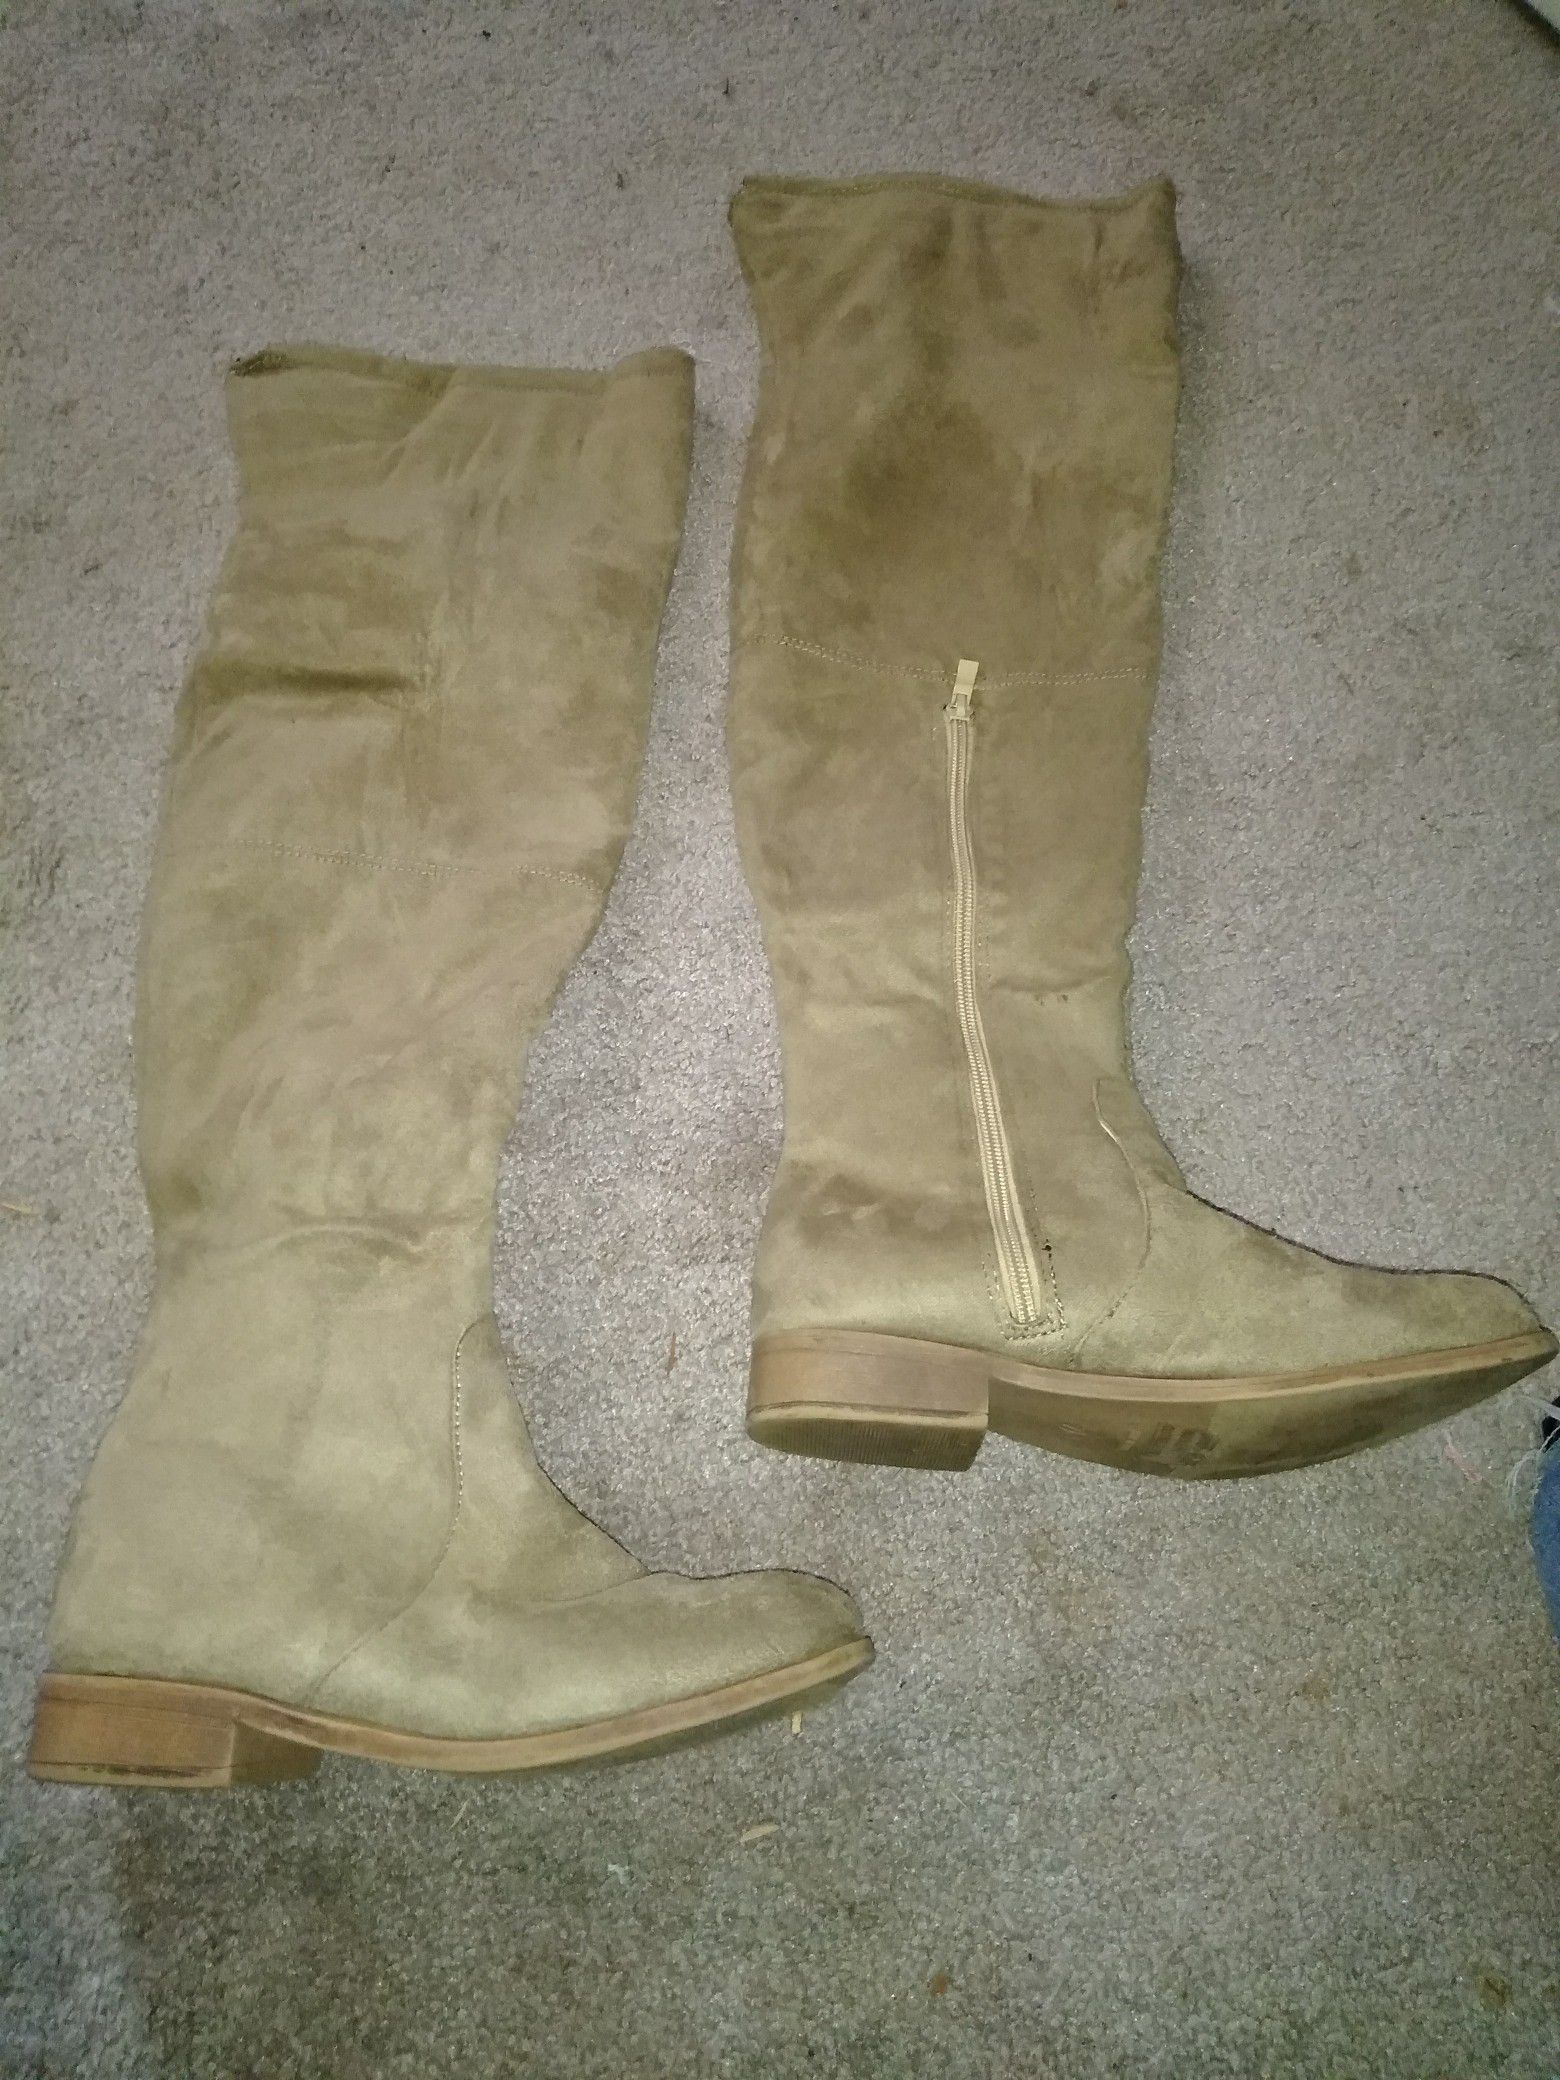 Suede boots